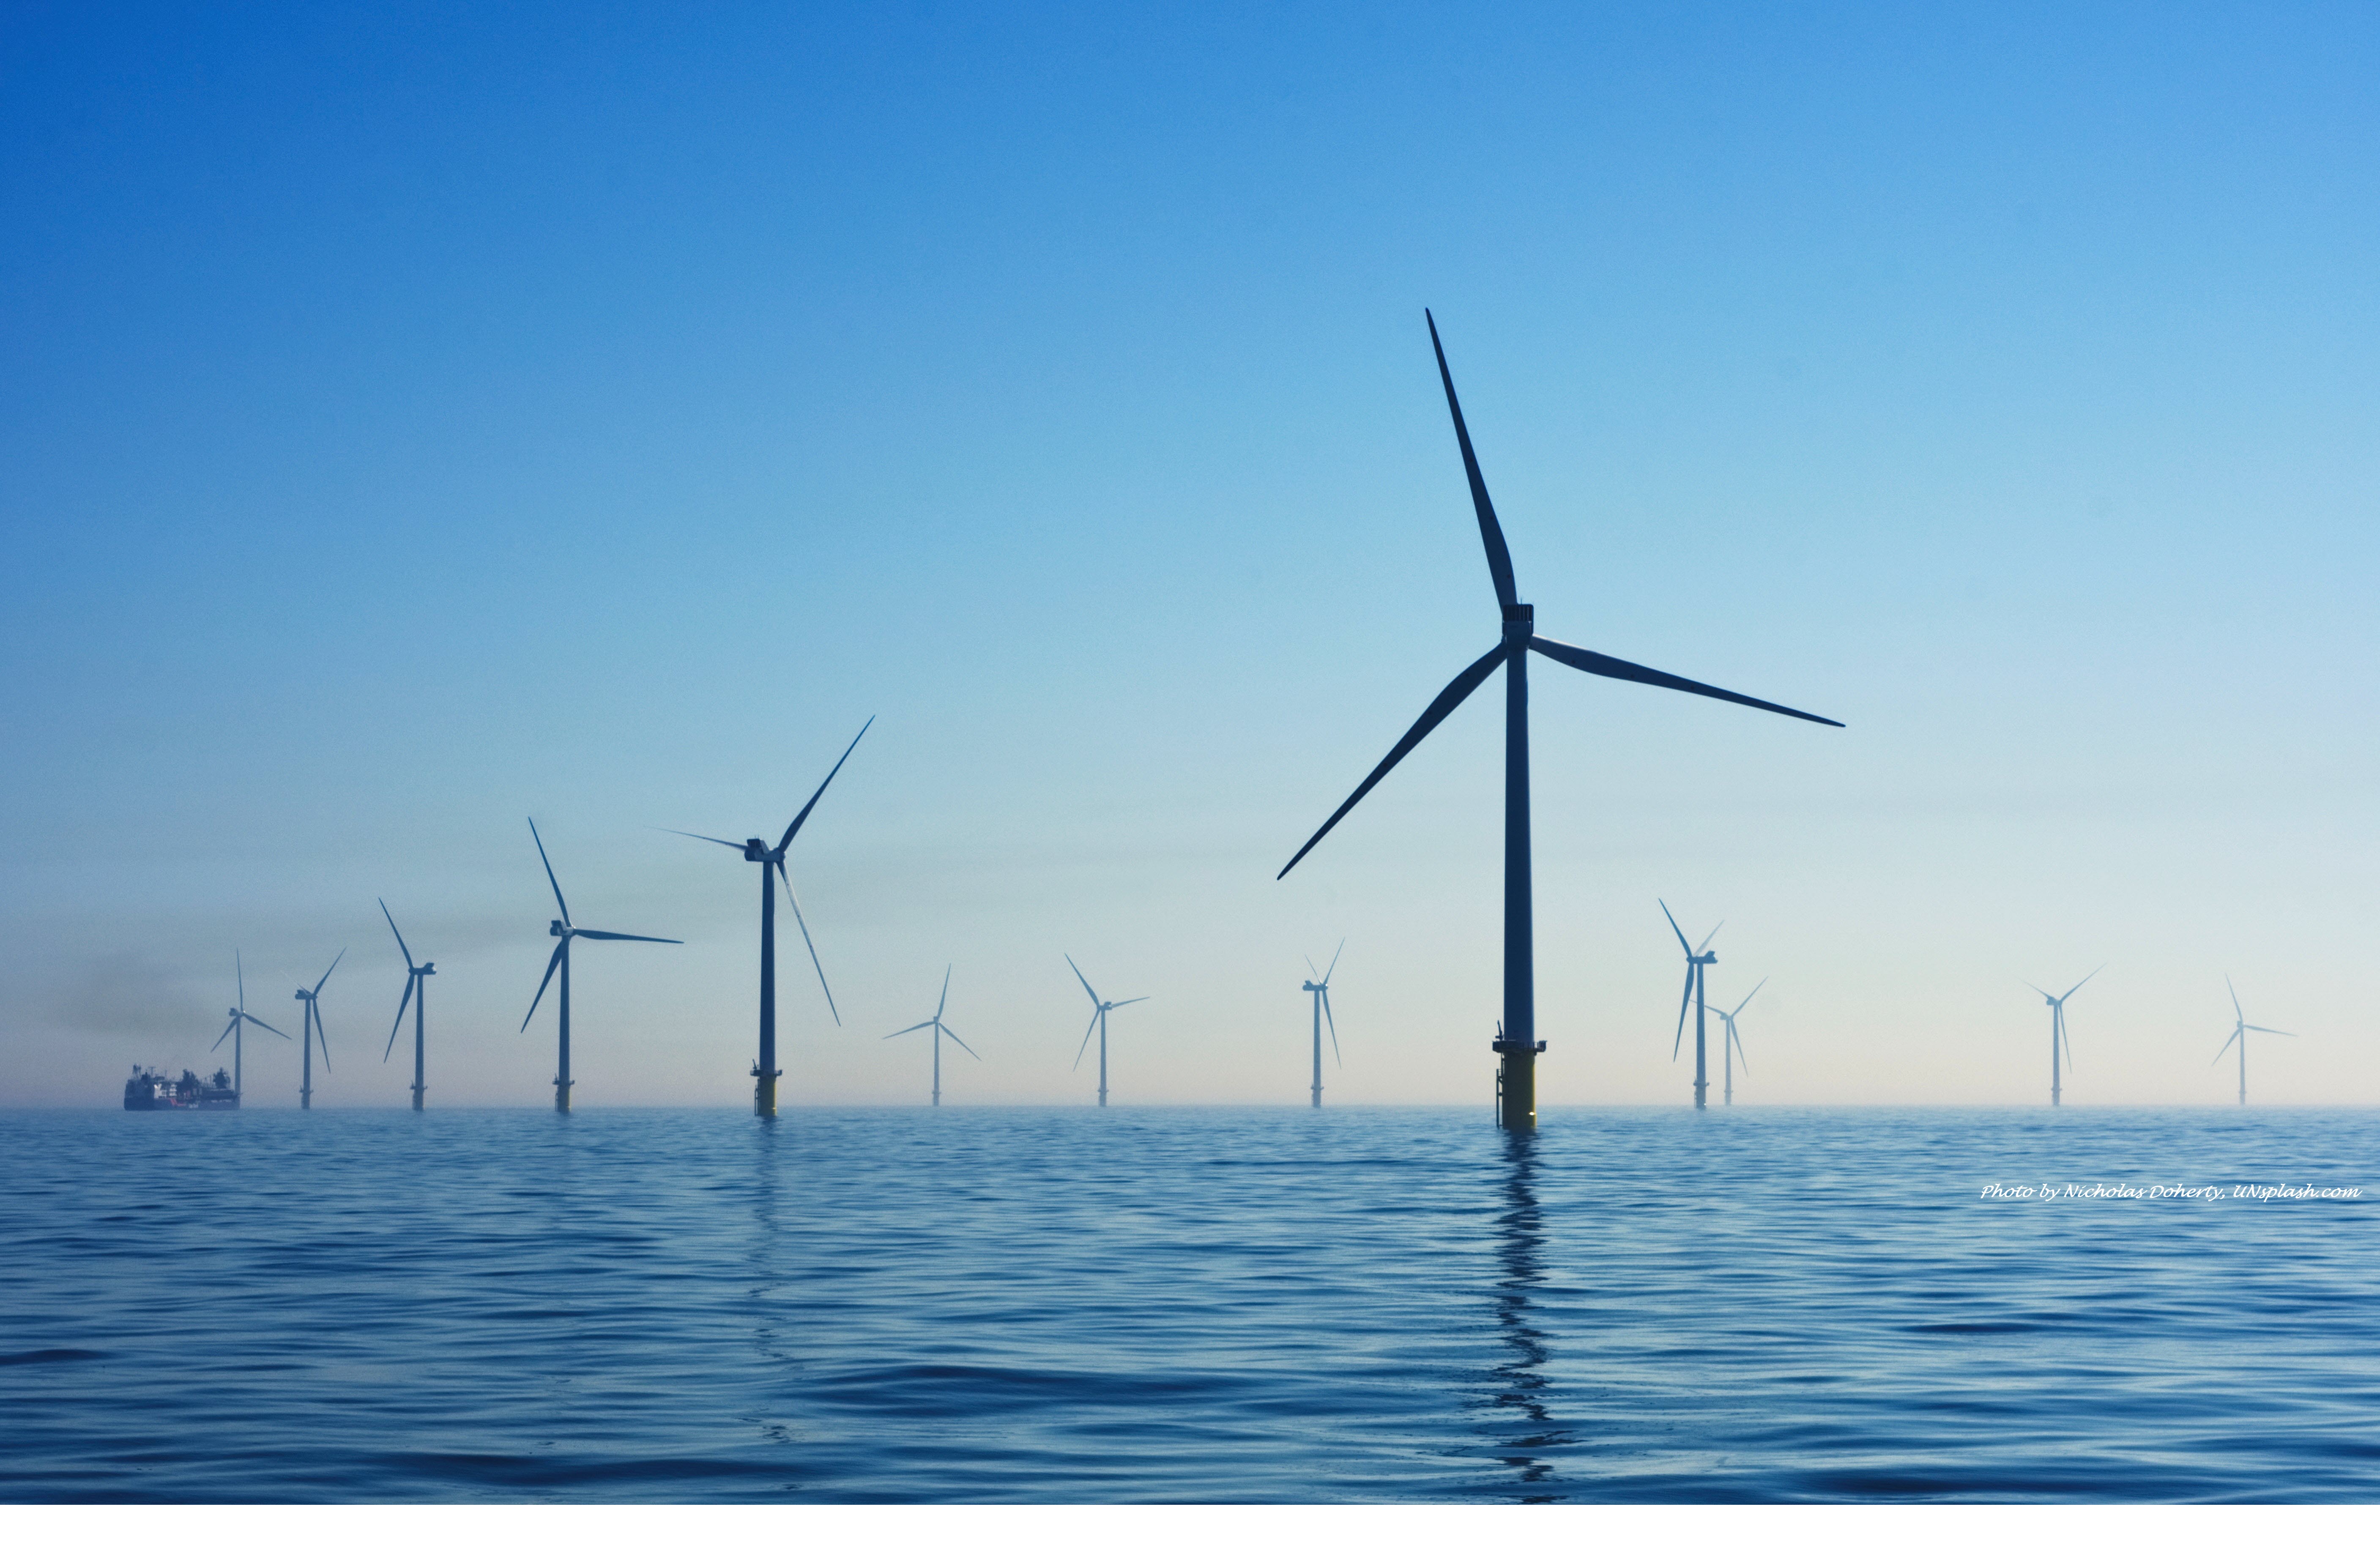 The EU Gives 290 million NOK to Test Floating Offshore Wind in Rogaland